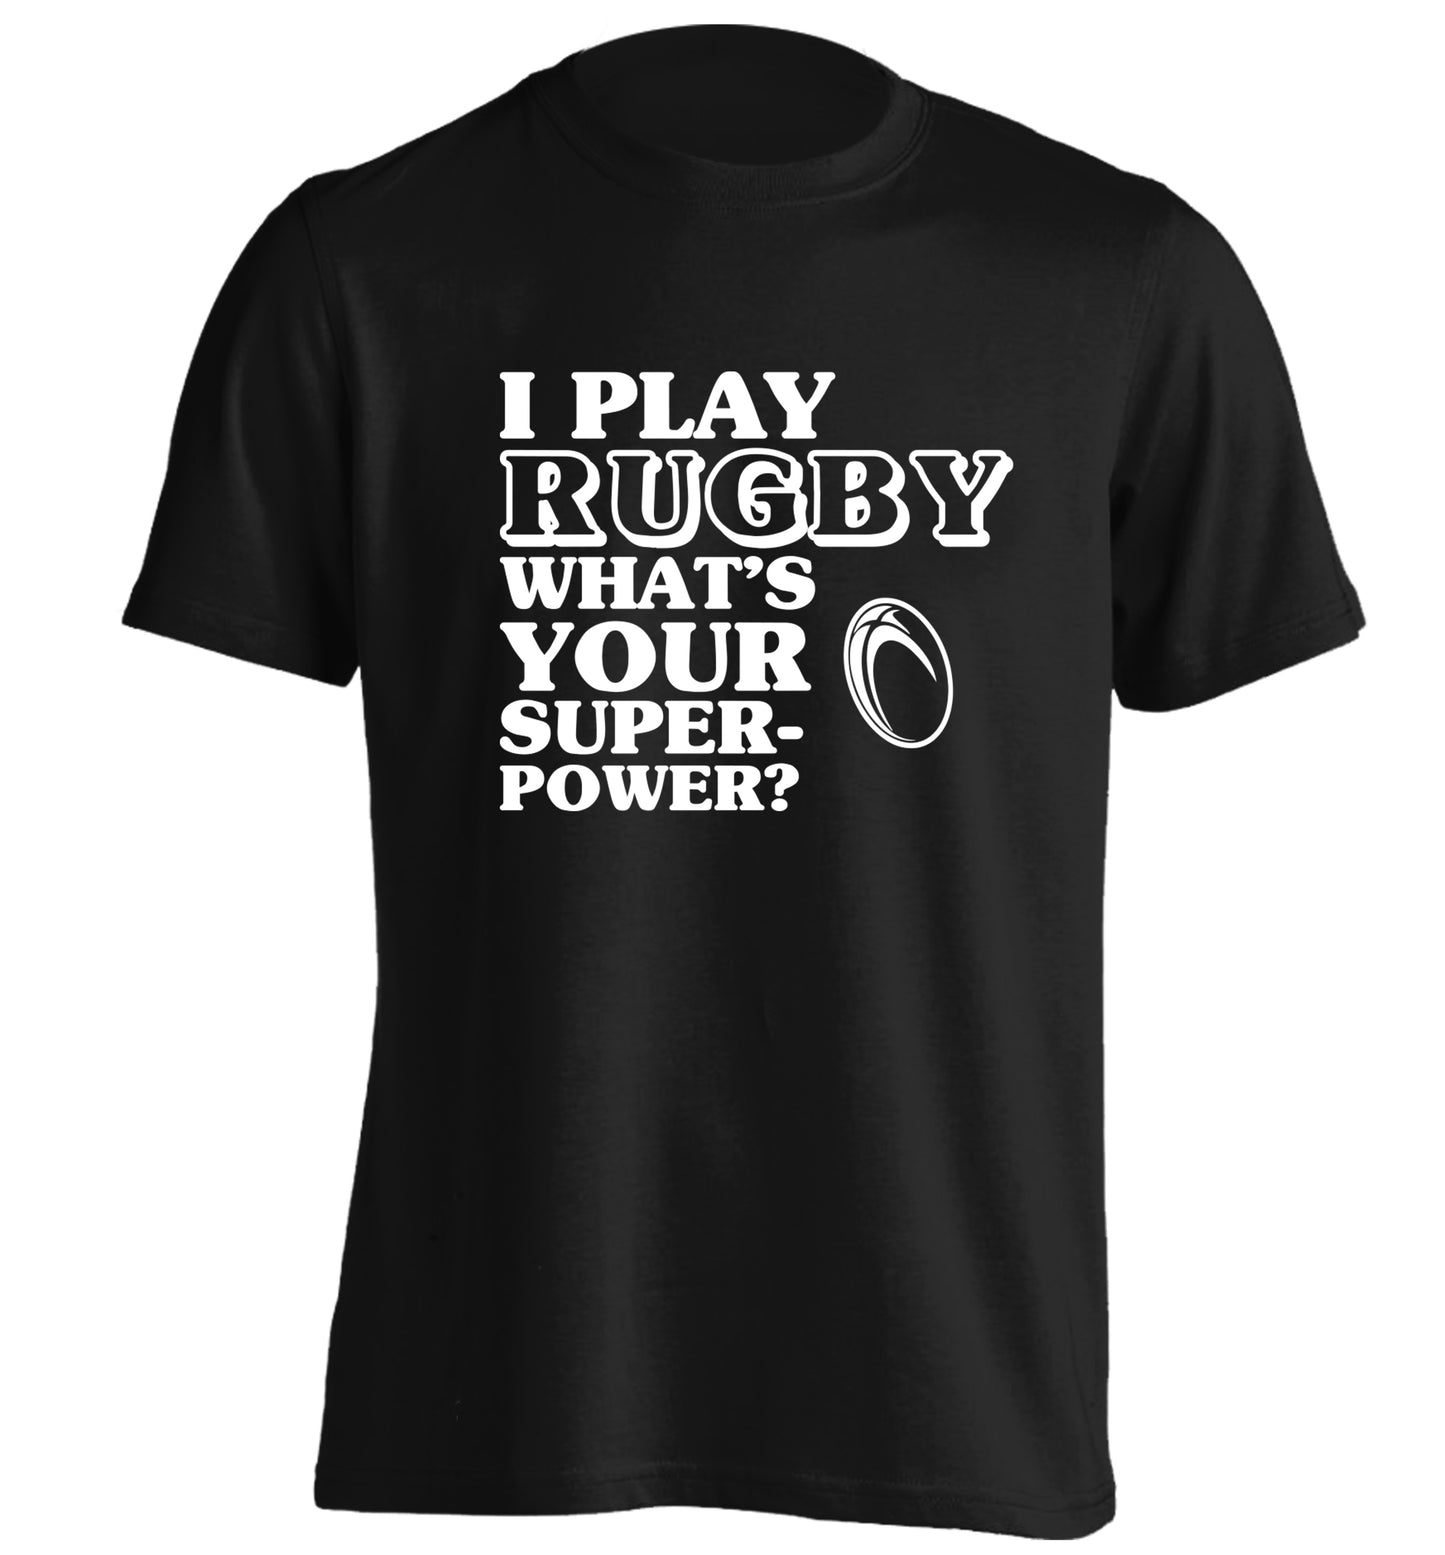 I play rugby what's your superpower? adults unisex black Tshirt 2XL